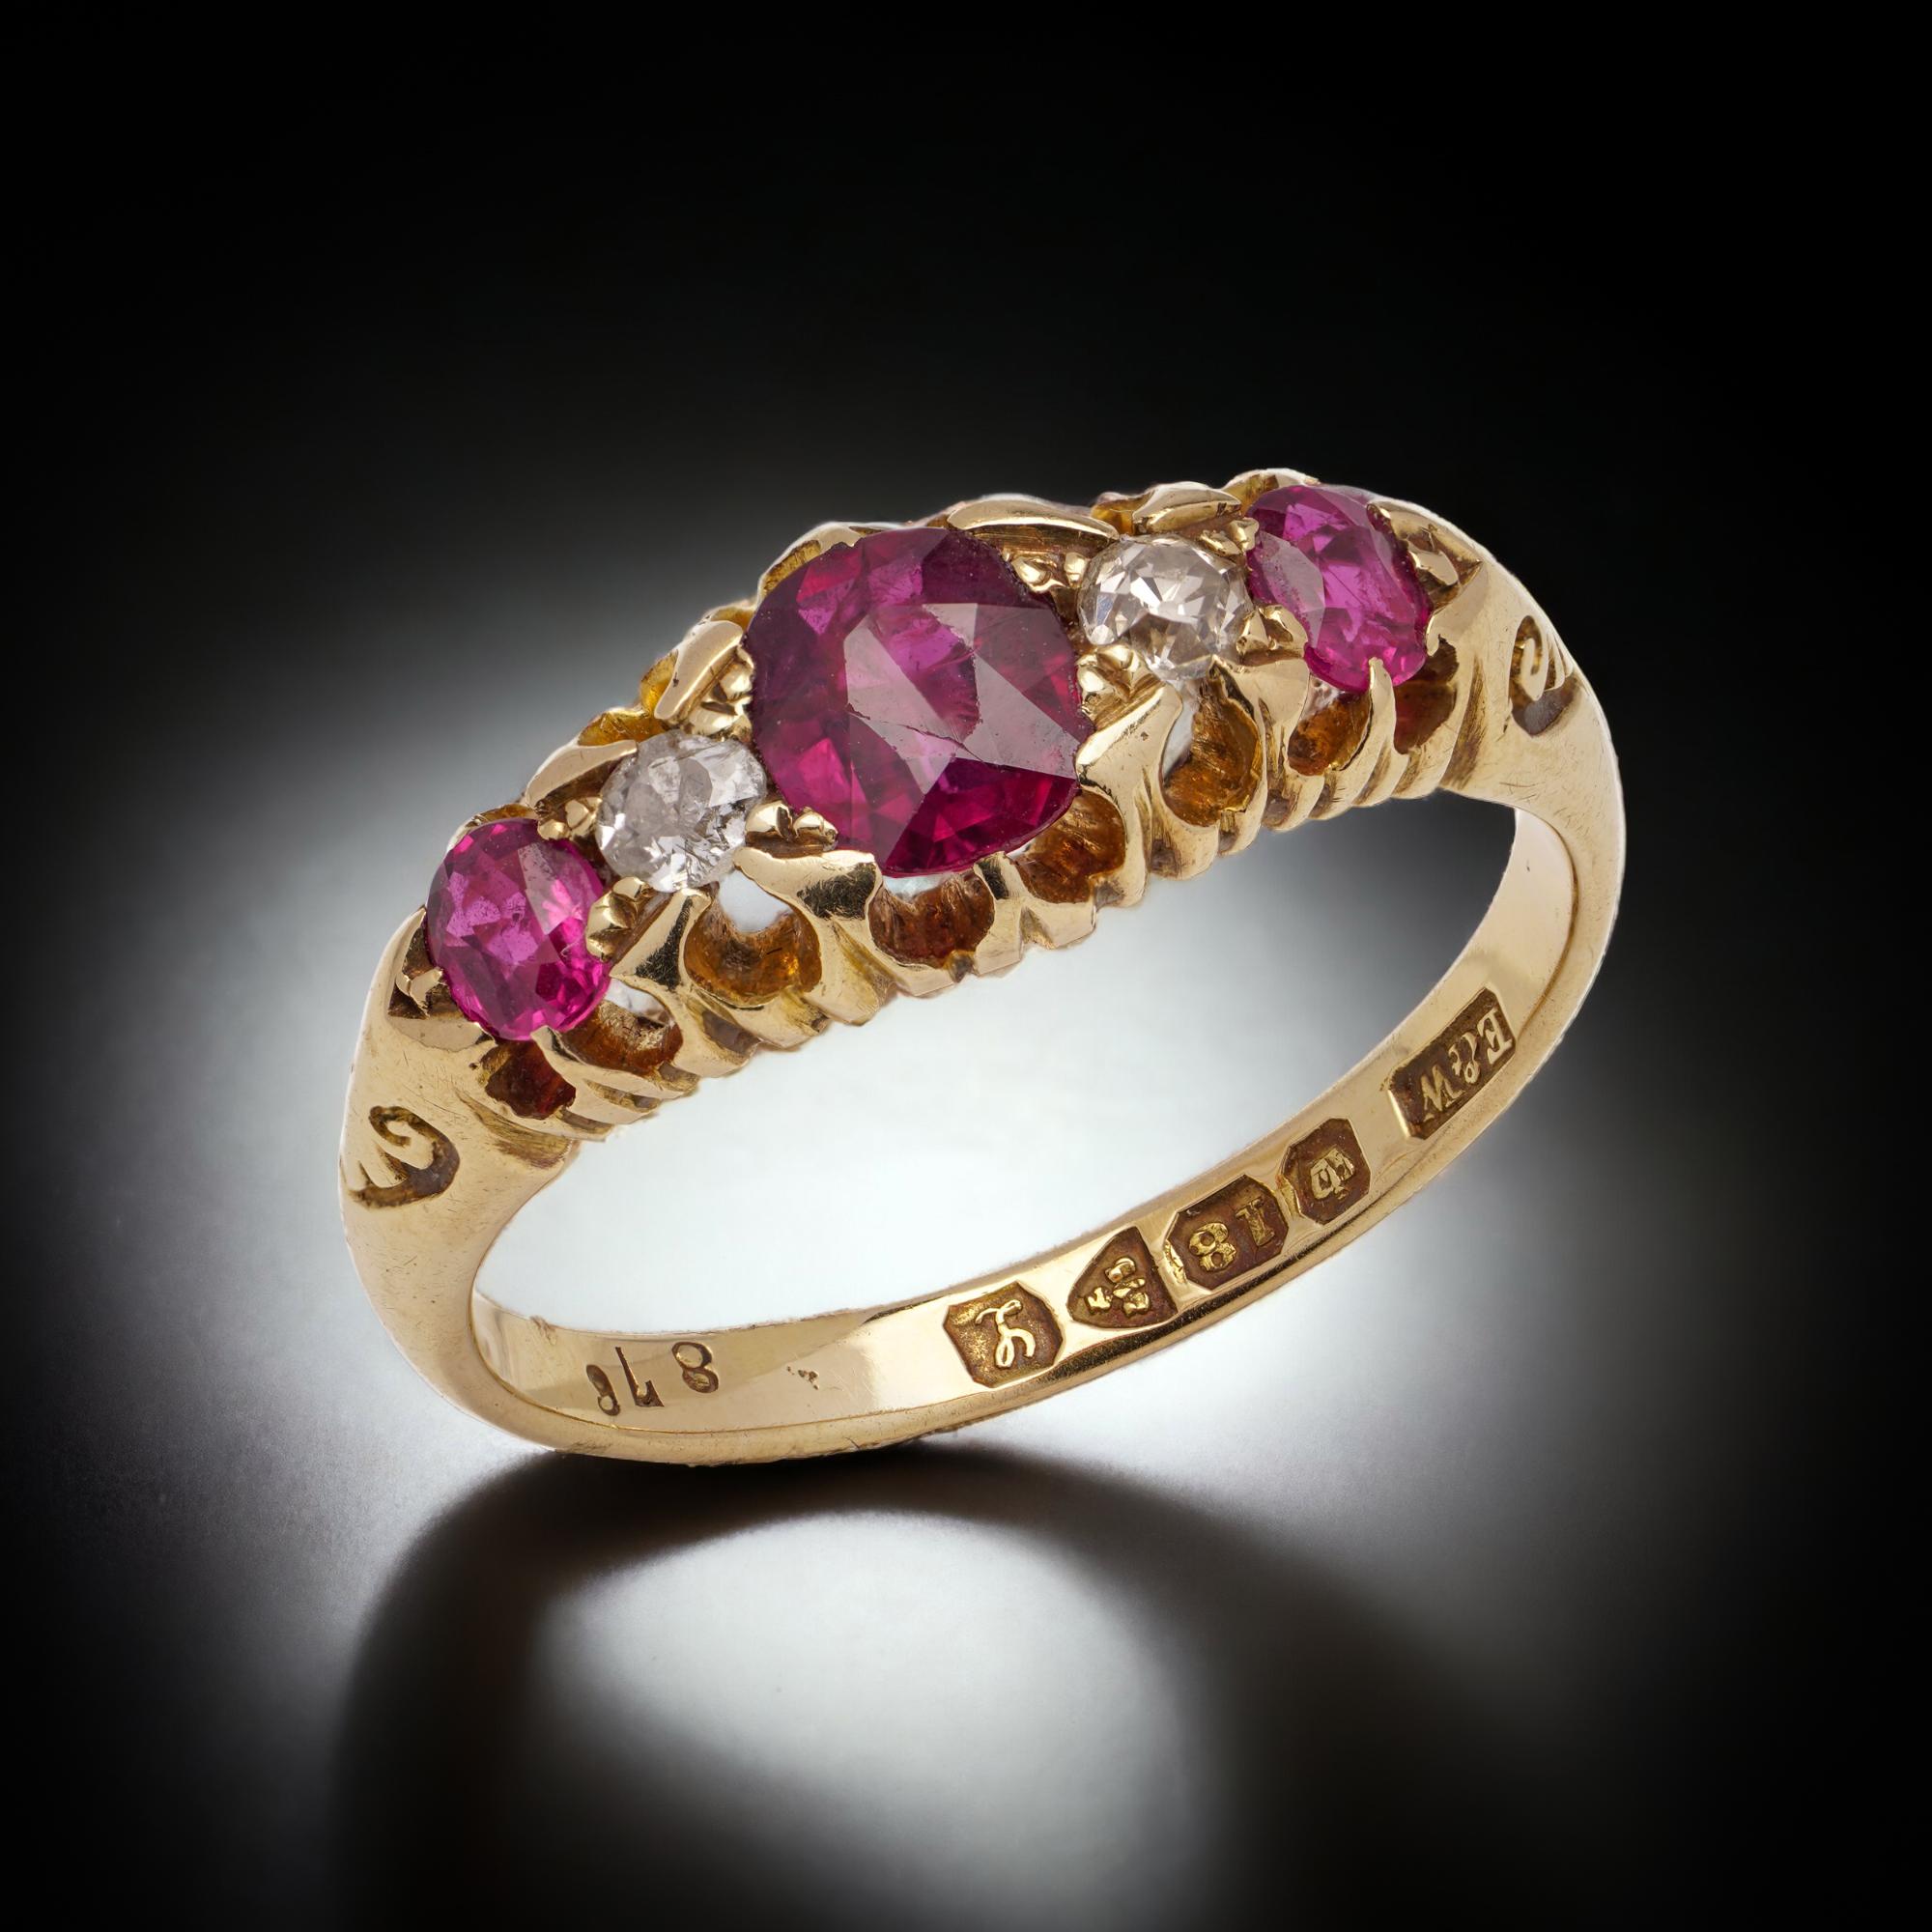 Antique Late Edwardian 18 kt. Yellow gold five-stone ruby and diamond ring. 
Made in England, Chester, 1911
Maker: Edwin Whitehouse
Fully hallmarked. 

Dimensions - 
Ring Size (UK) = O 1/2(EU) = 56.5 (US) = 7.75
Ring size: 2.7 x 2 x 0.7 cm 
Weight: